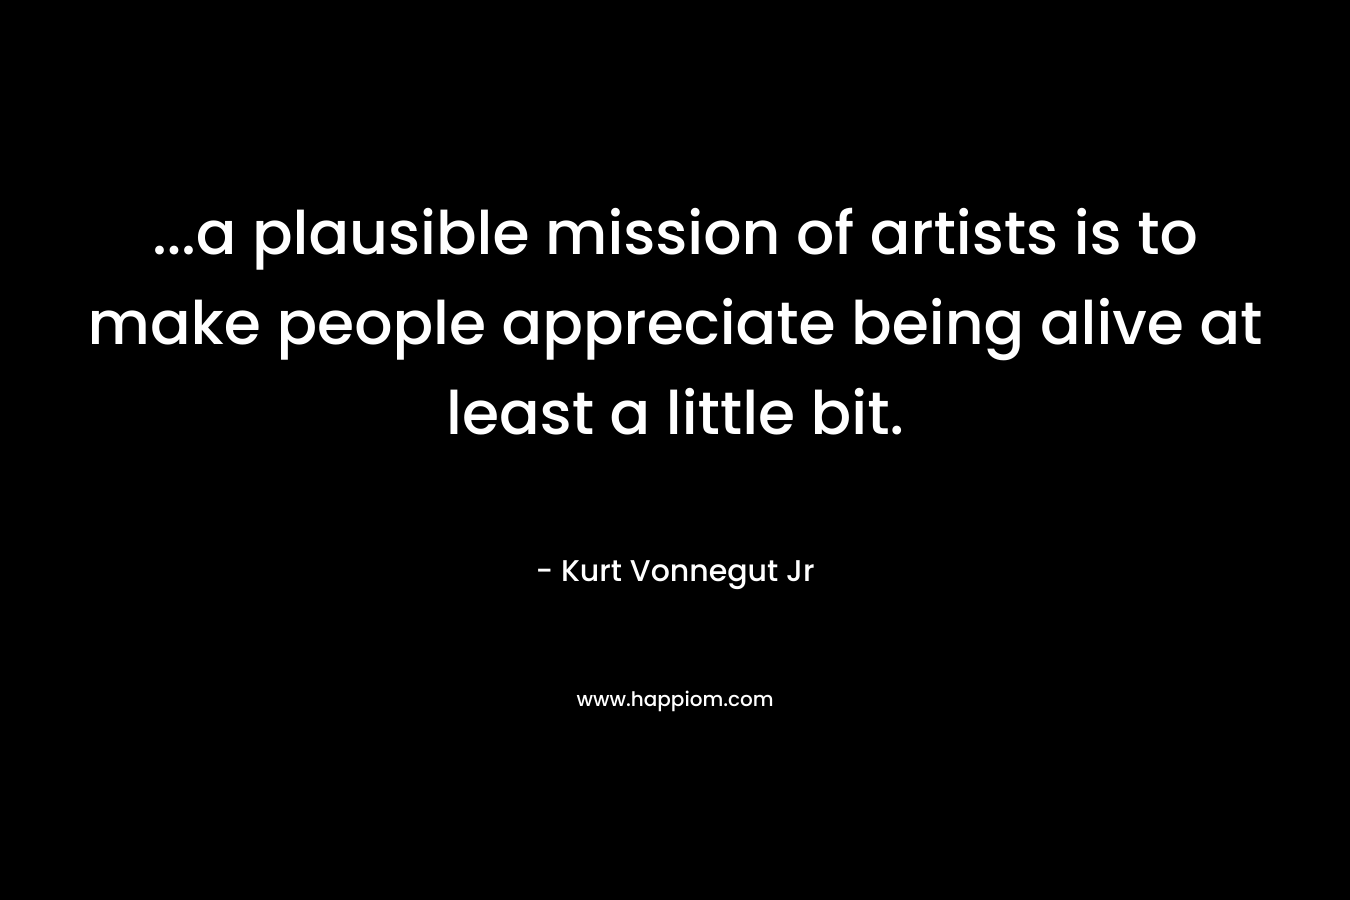 ...a plausible mission of artists is to make people appreciate being alive at least a little bit.